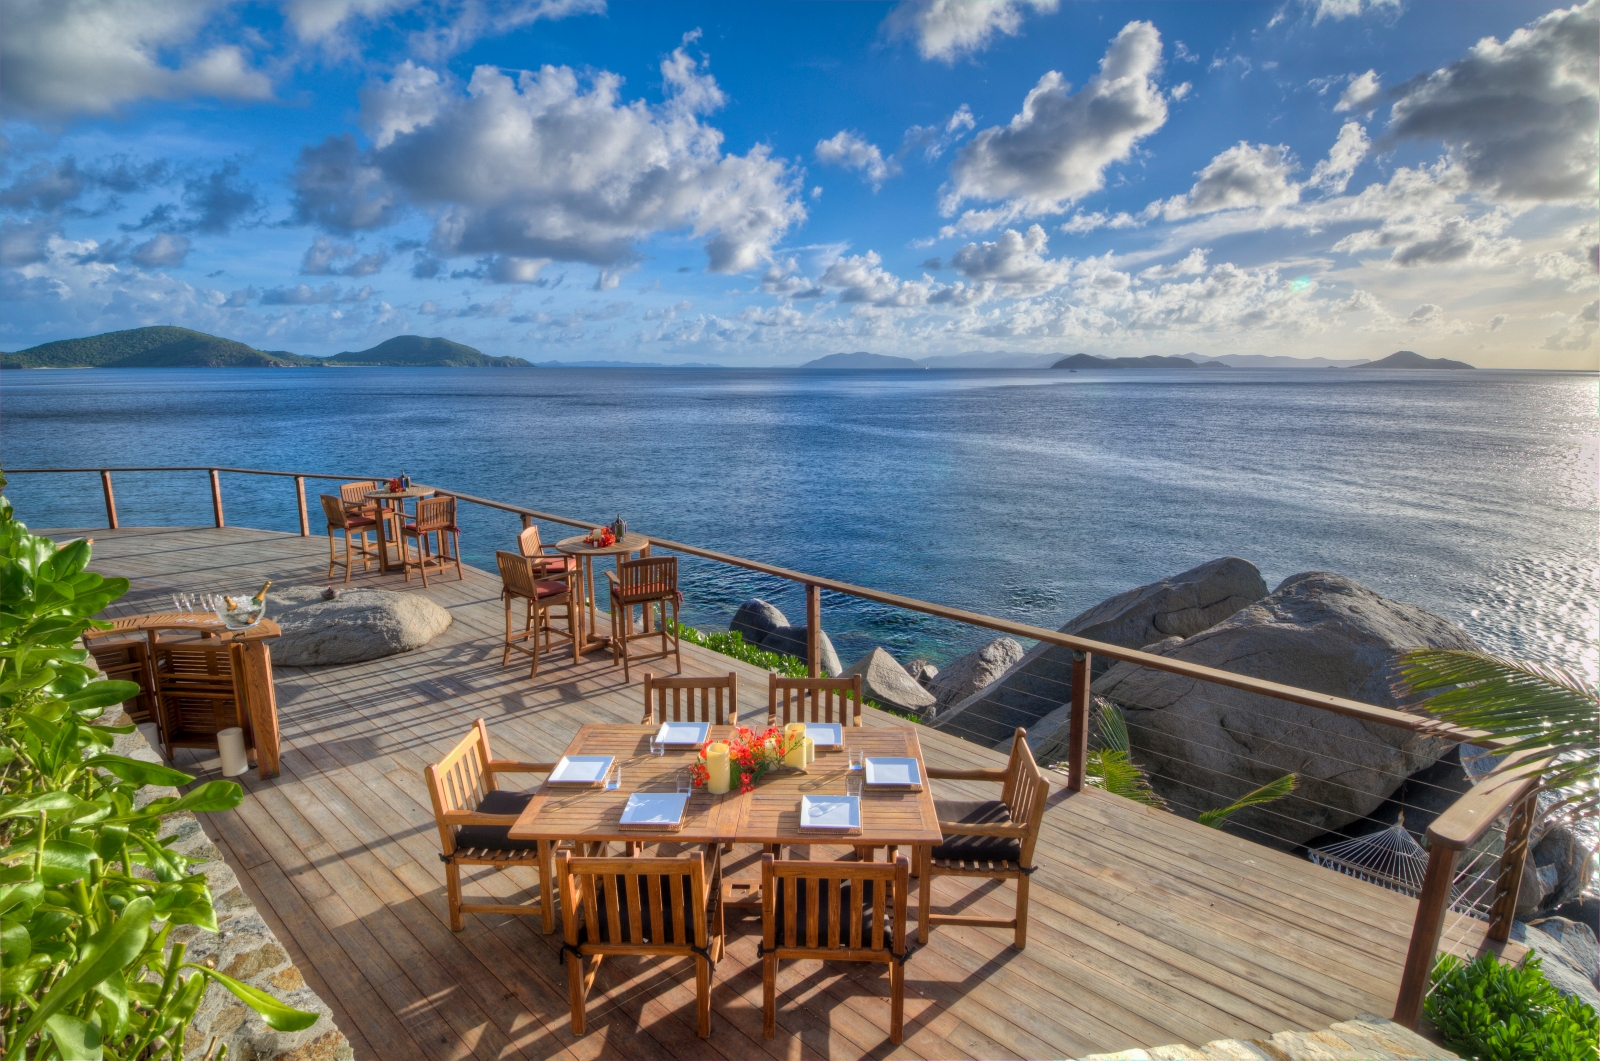 Terrace with dining tables and views across the ocean